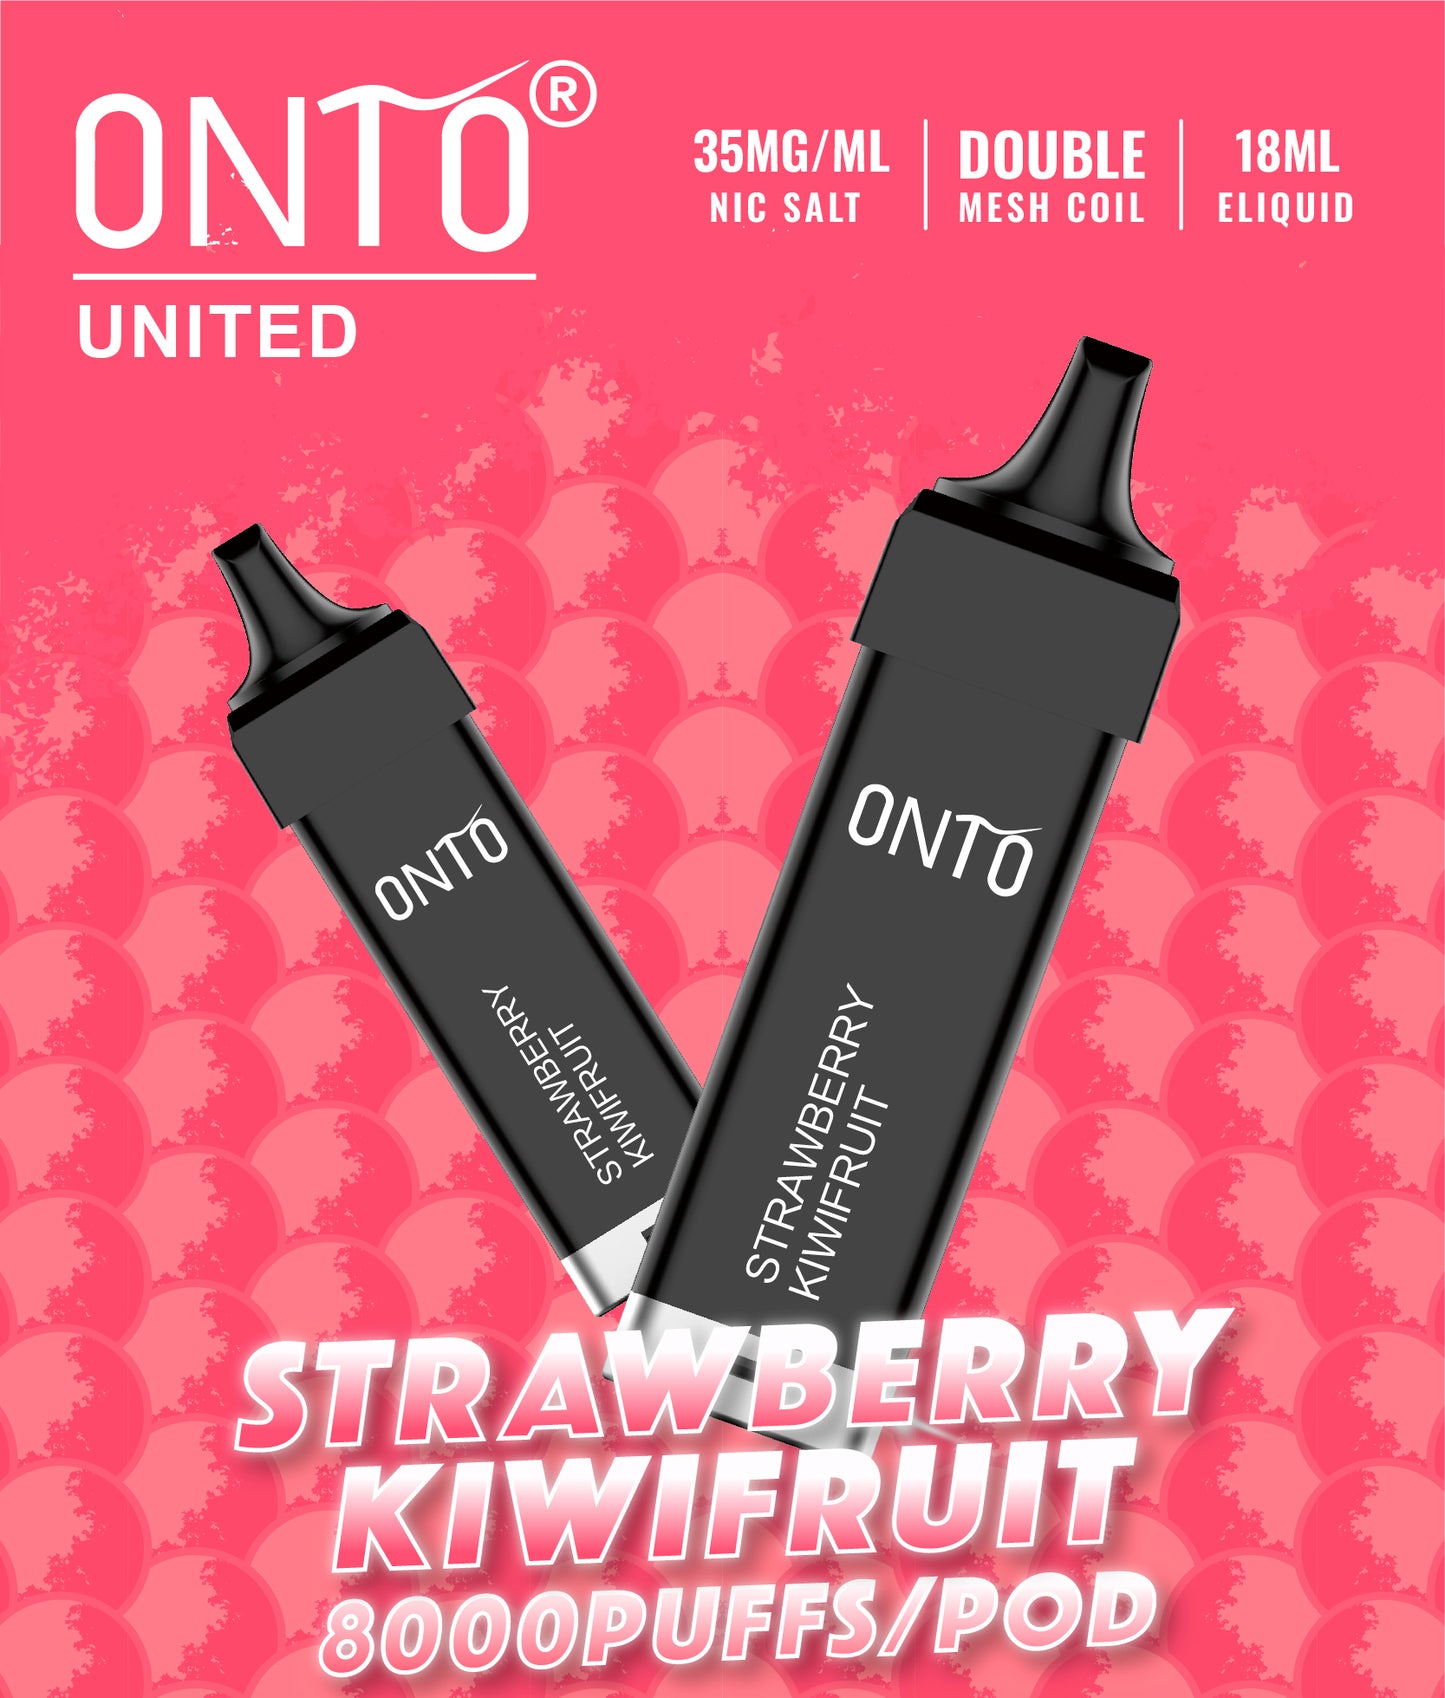 ONTO United Pre-filled Pods- 8000 puffs